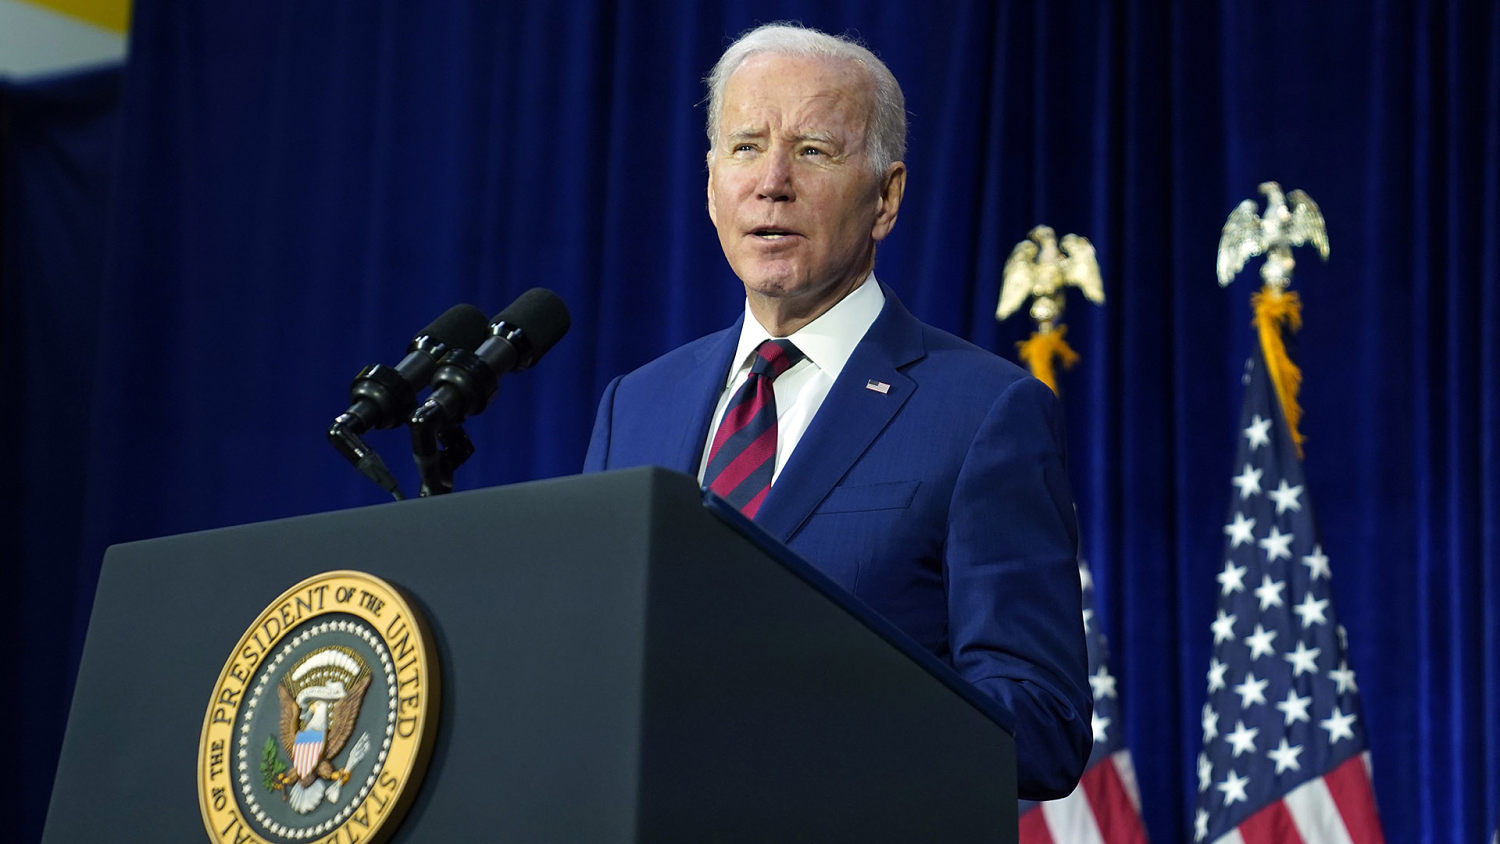 Biden delivers remarks on providing health care to veterans impacted by toxic exposure